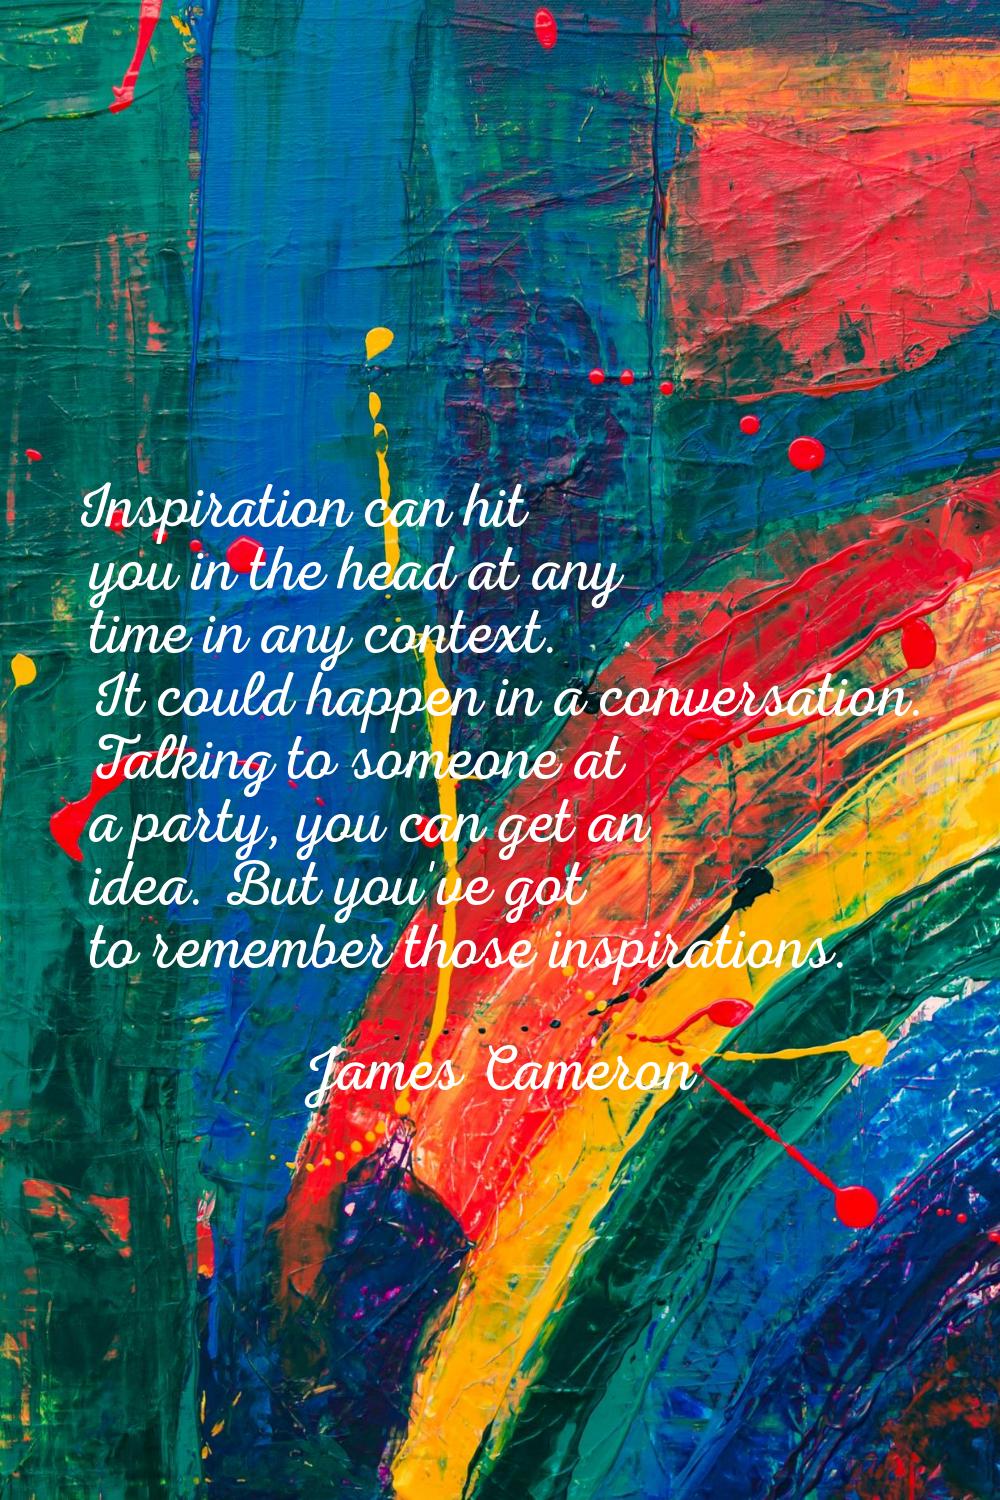 Inspiration can hit you in the head at any time in any context. It could happen in a conversation. 